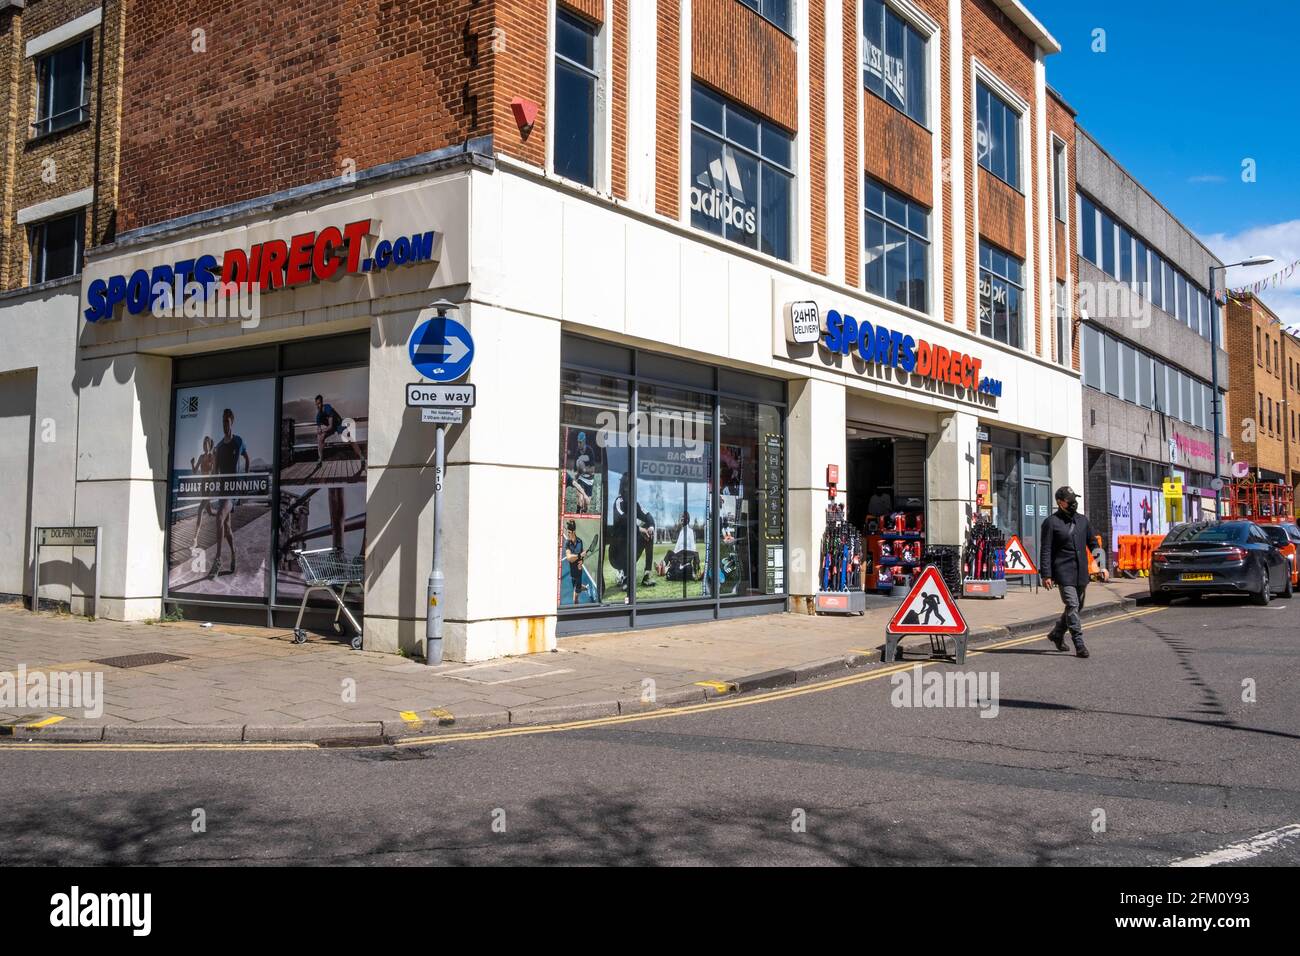 Kingston Upon Thames London UK, May 04 2021, High Street Retail Chain Sports Direct Business Shop Or Store Front Stock Photo